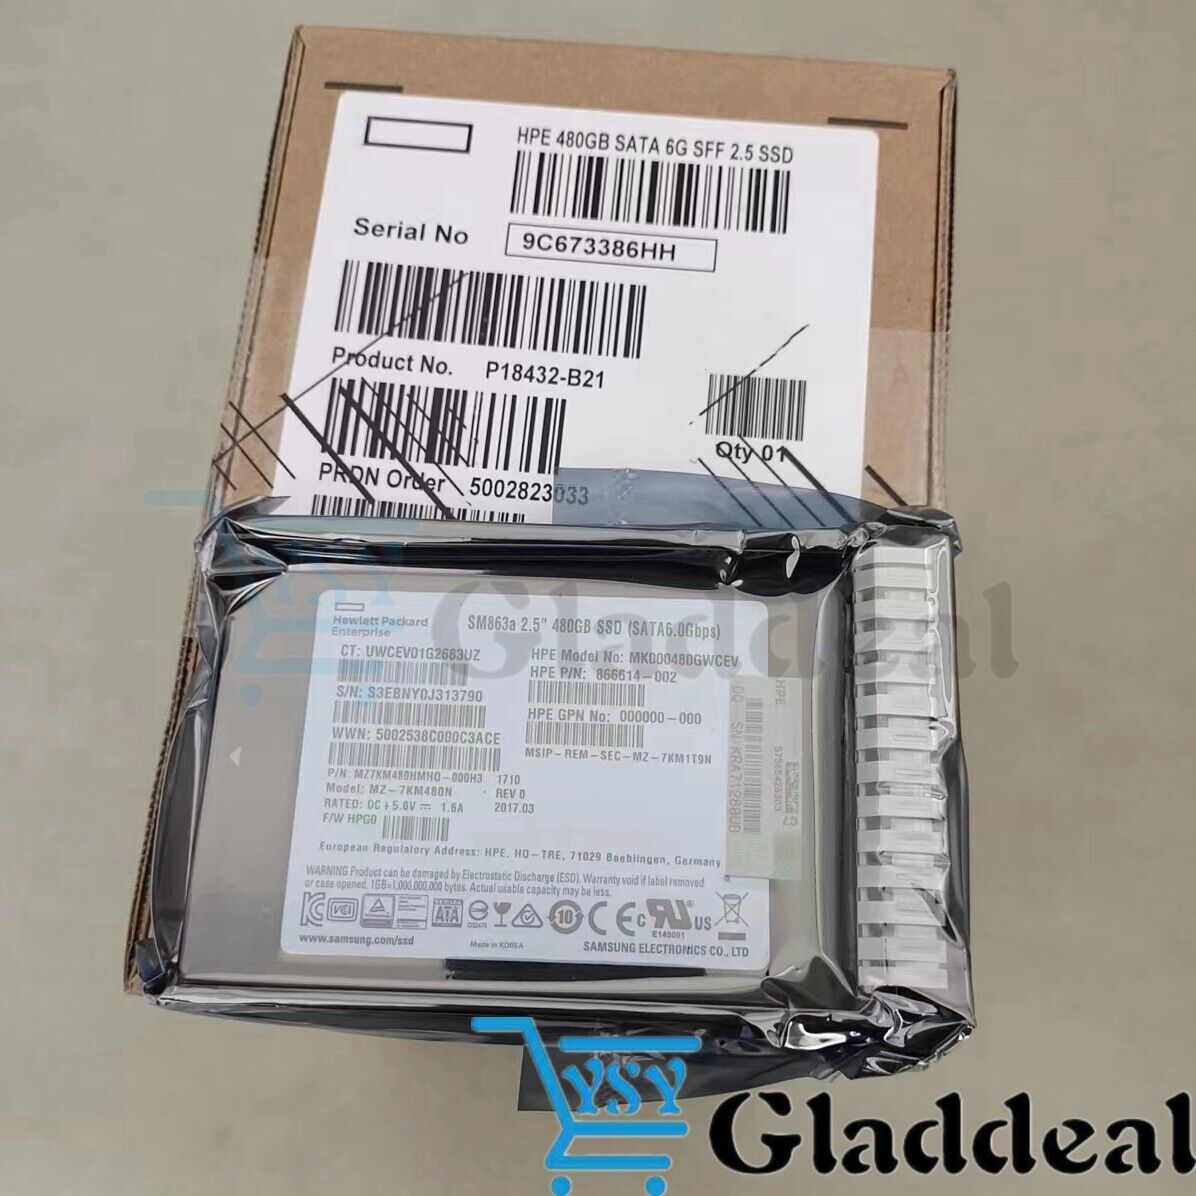 1PC FOR HPE 480GB Mixed Use SATA3 SSD Drive Gen10 SFF Hot Swap P18432-B21